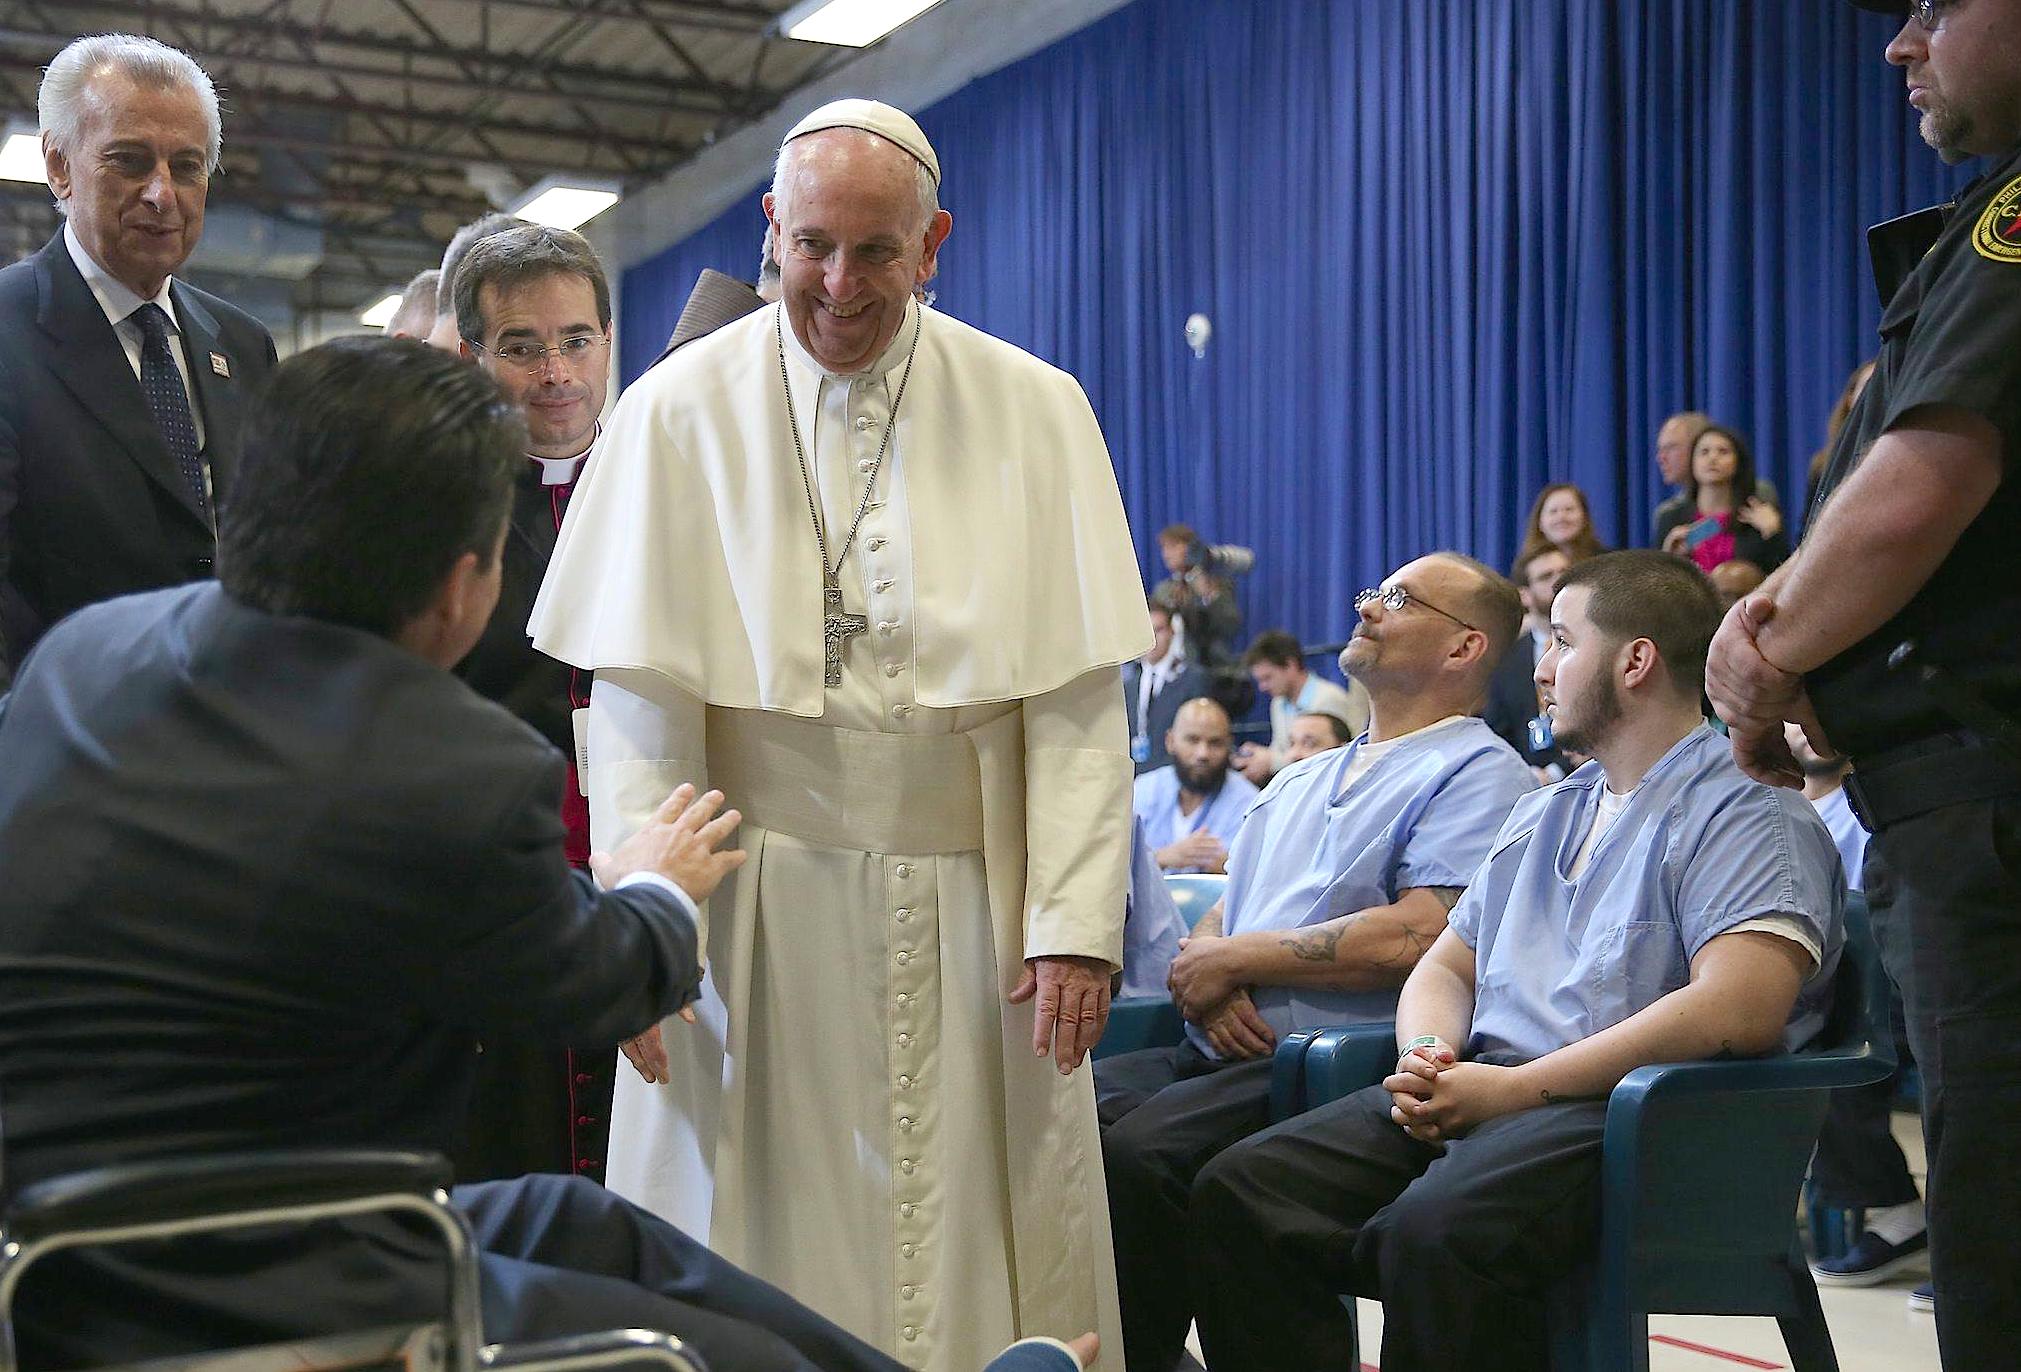 Philadelphia Congressman Brendan Boyle (L) is greeted by Pope Francis (C) as he visits the Curran Fromhold Correctional Facility in Philadelphia